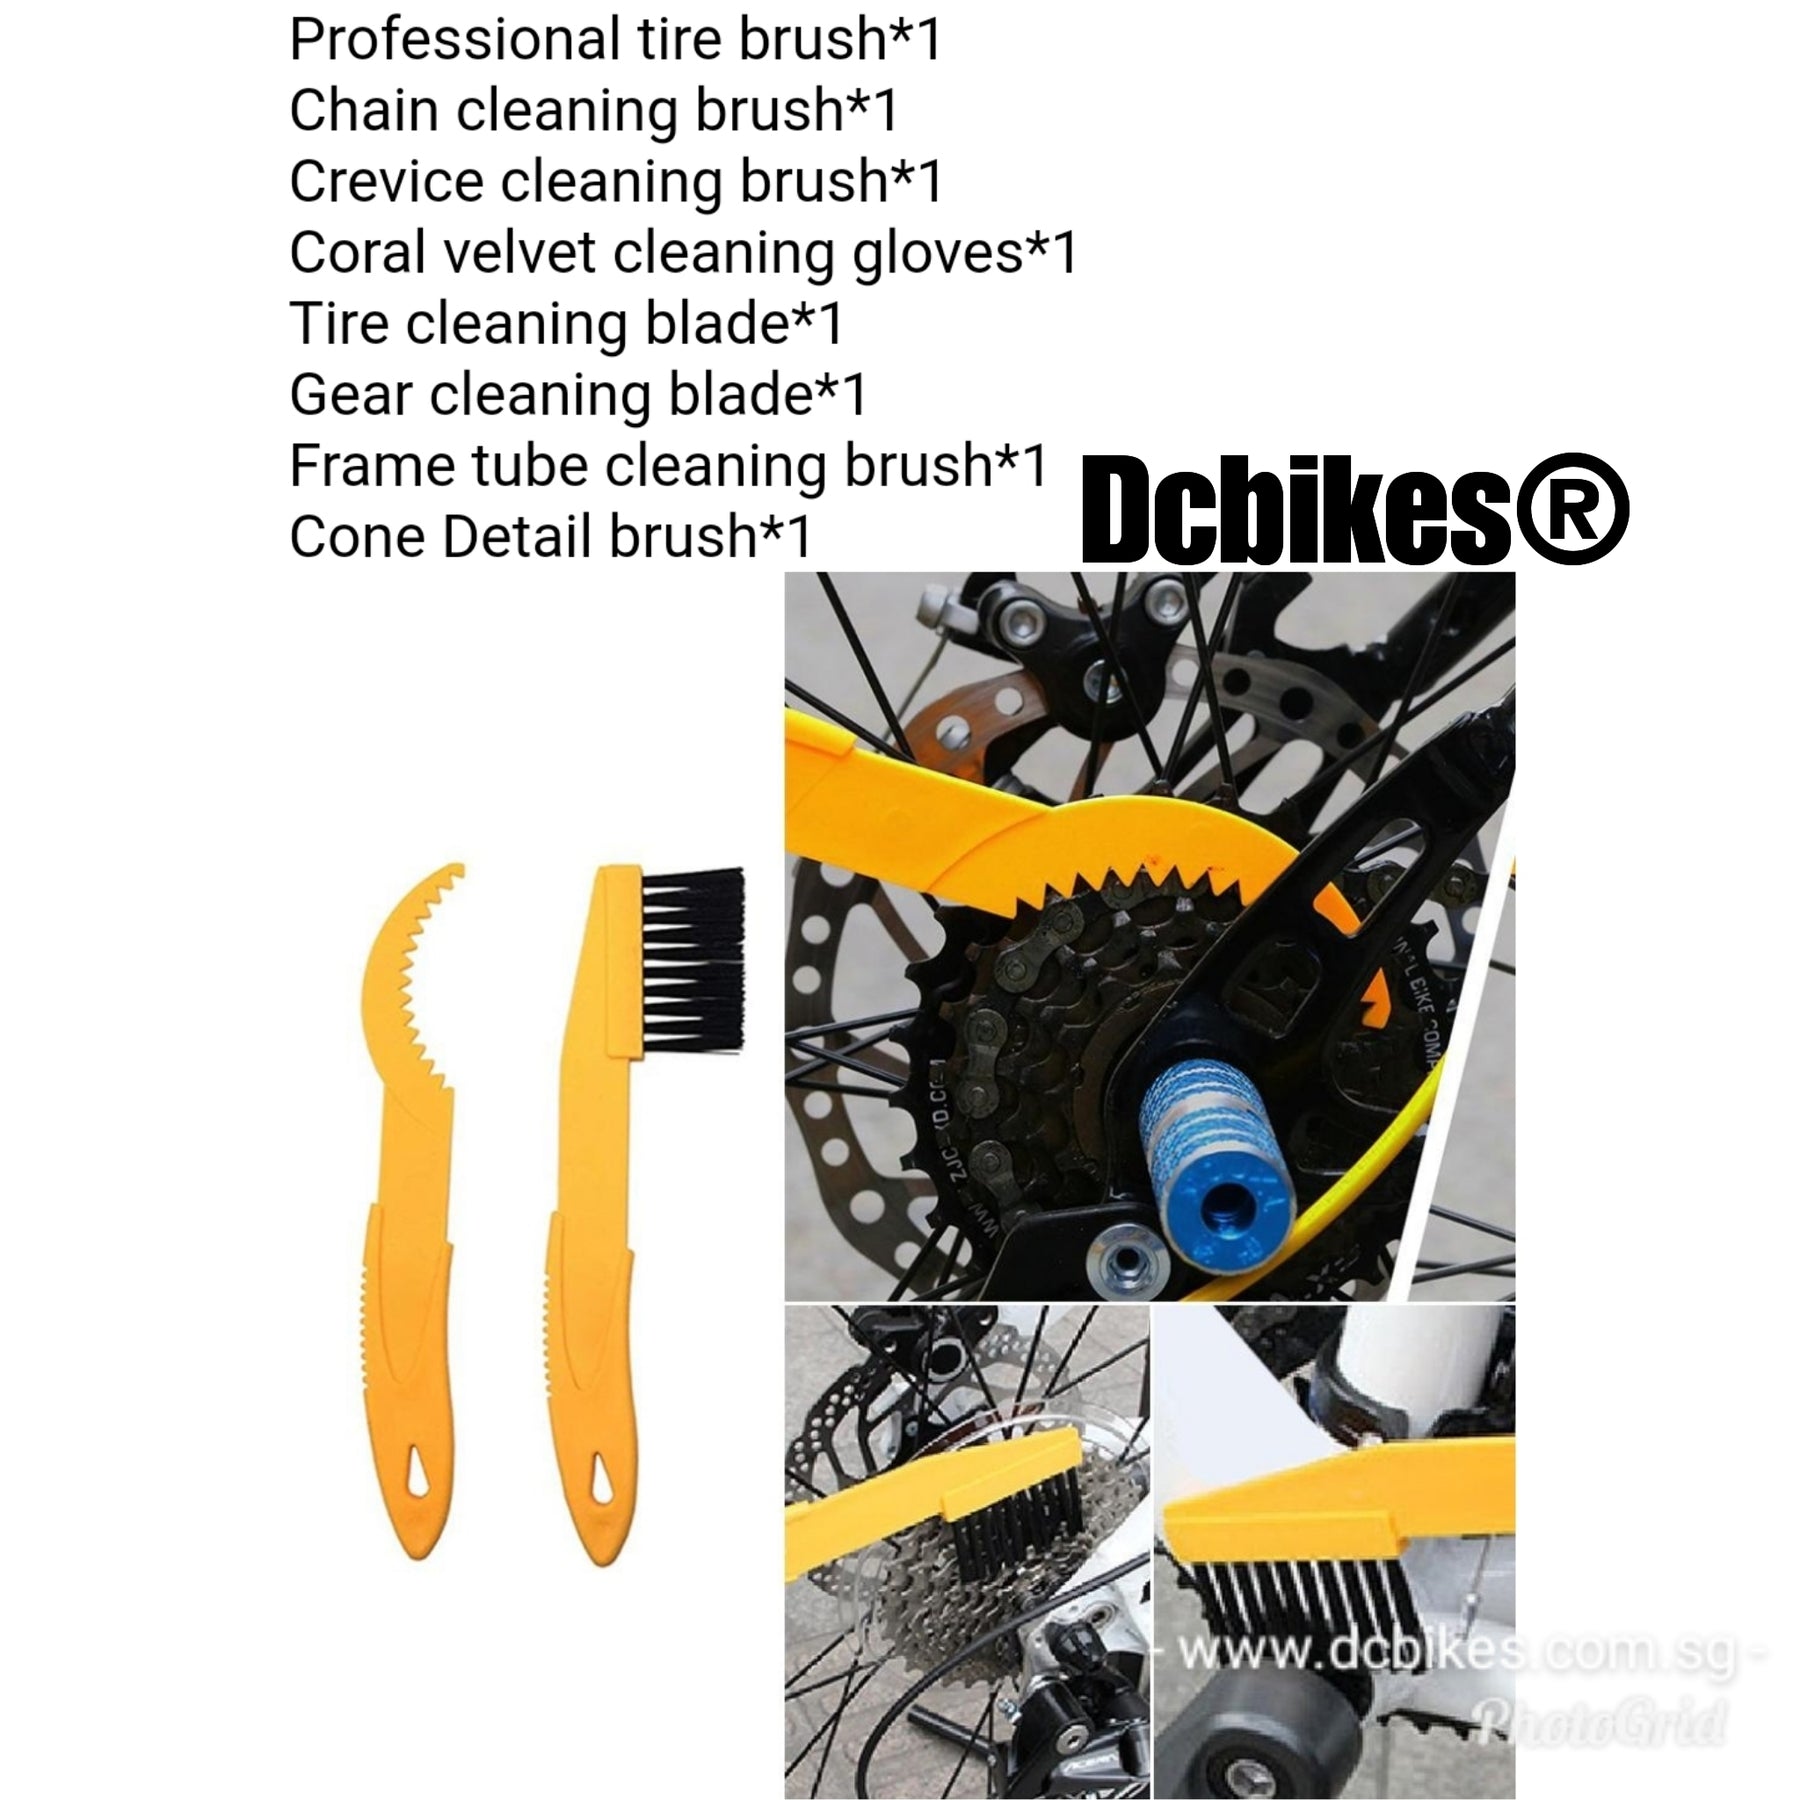 UILB Bike Chain Scrubber Set - Bicycle Chain CLEANING AGENT- 10 OZ Bike Chain  Cleaner, Bicycle Durable Chain Gear Wheel Cleaning Brush Kit